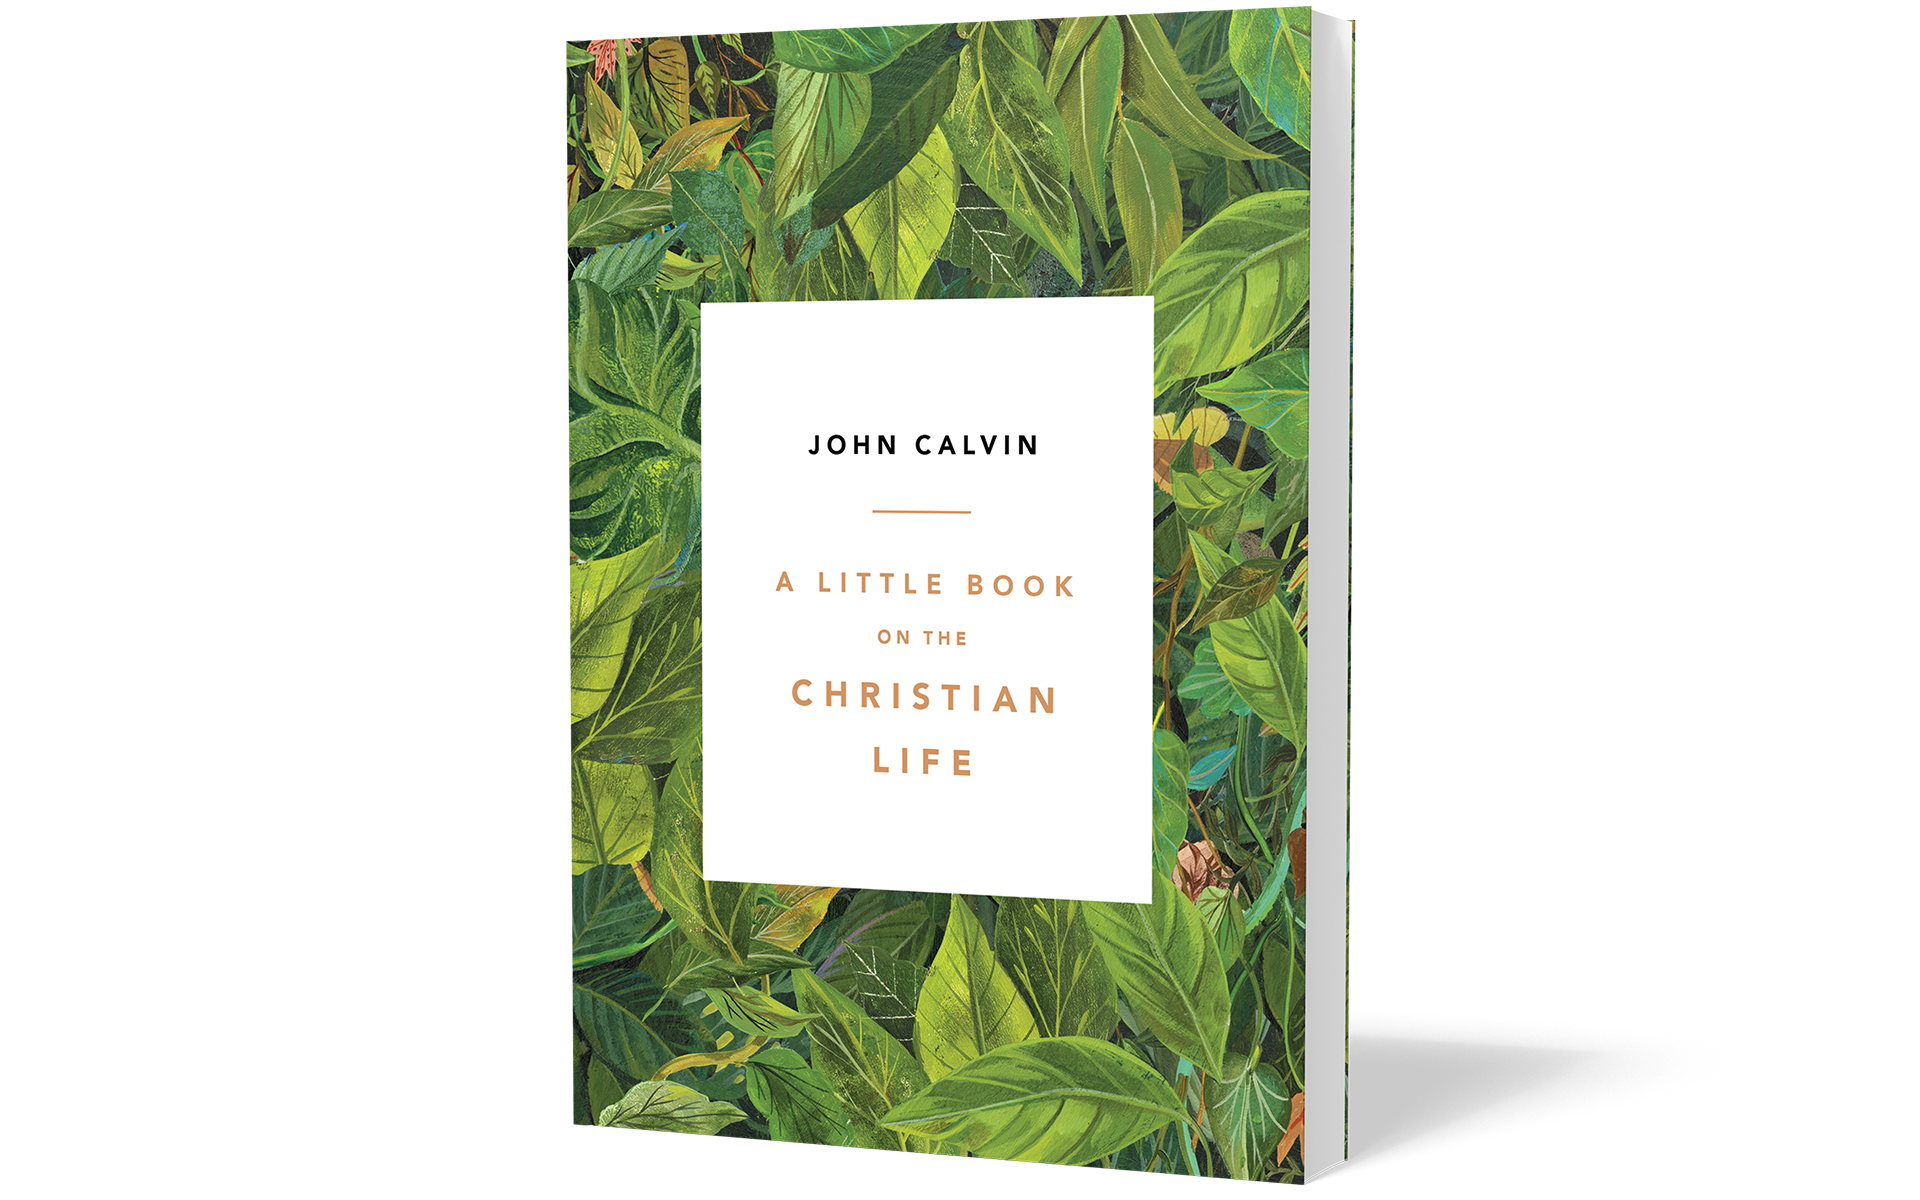 A Little Book on the Christian Life, leaves cover